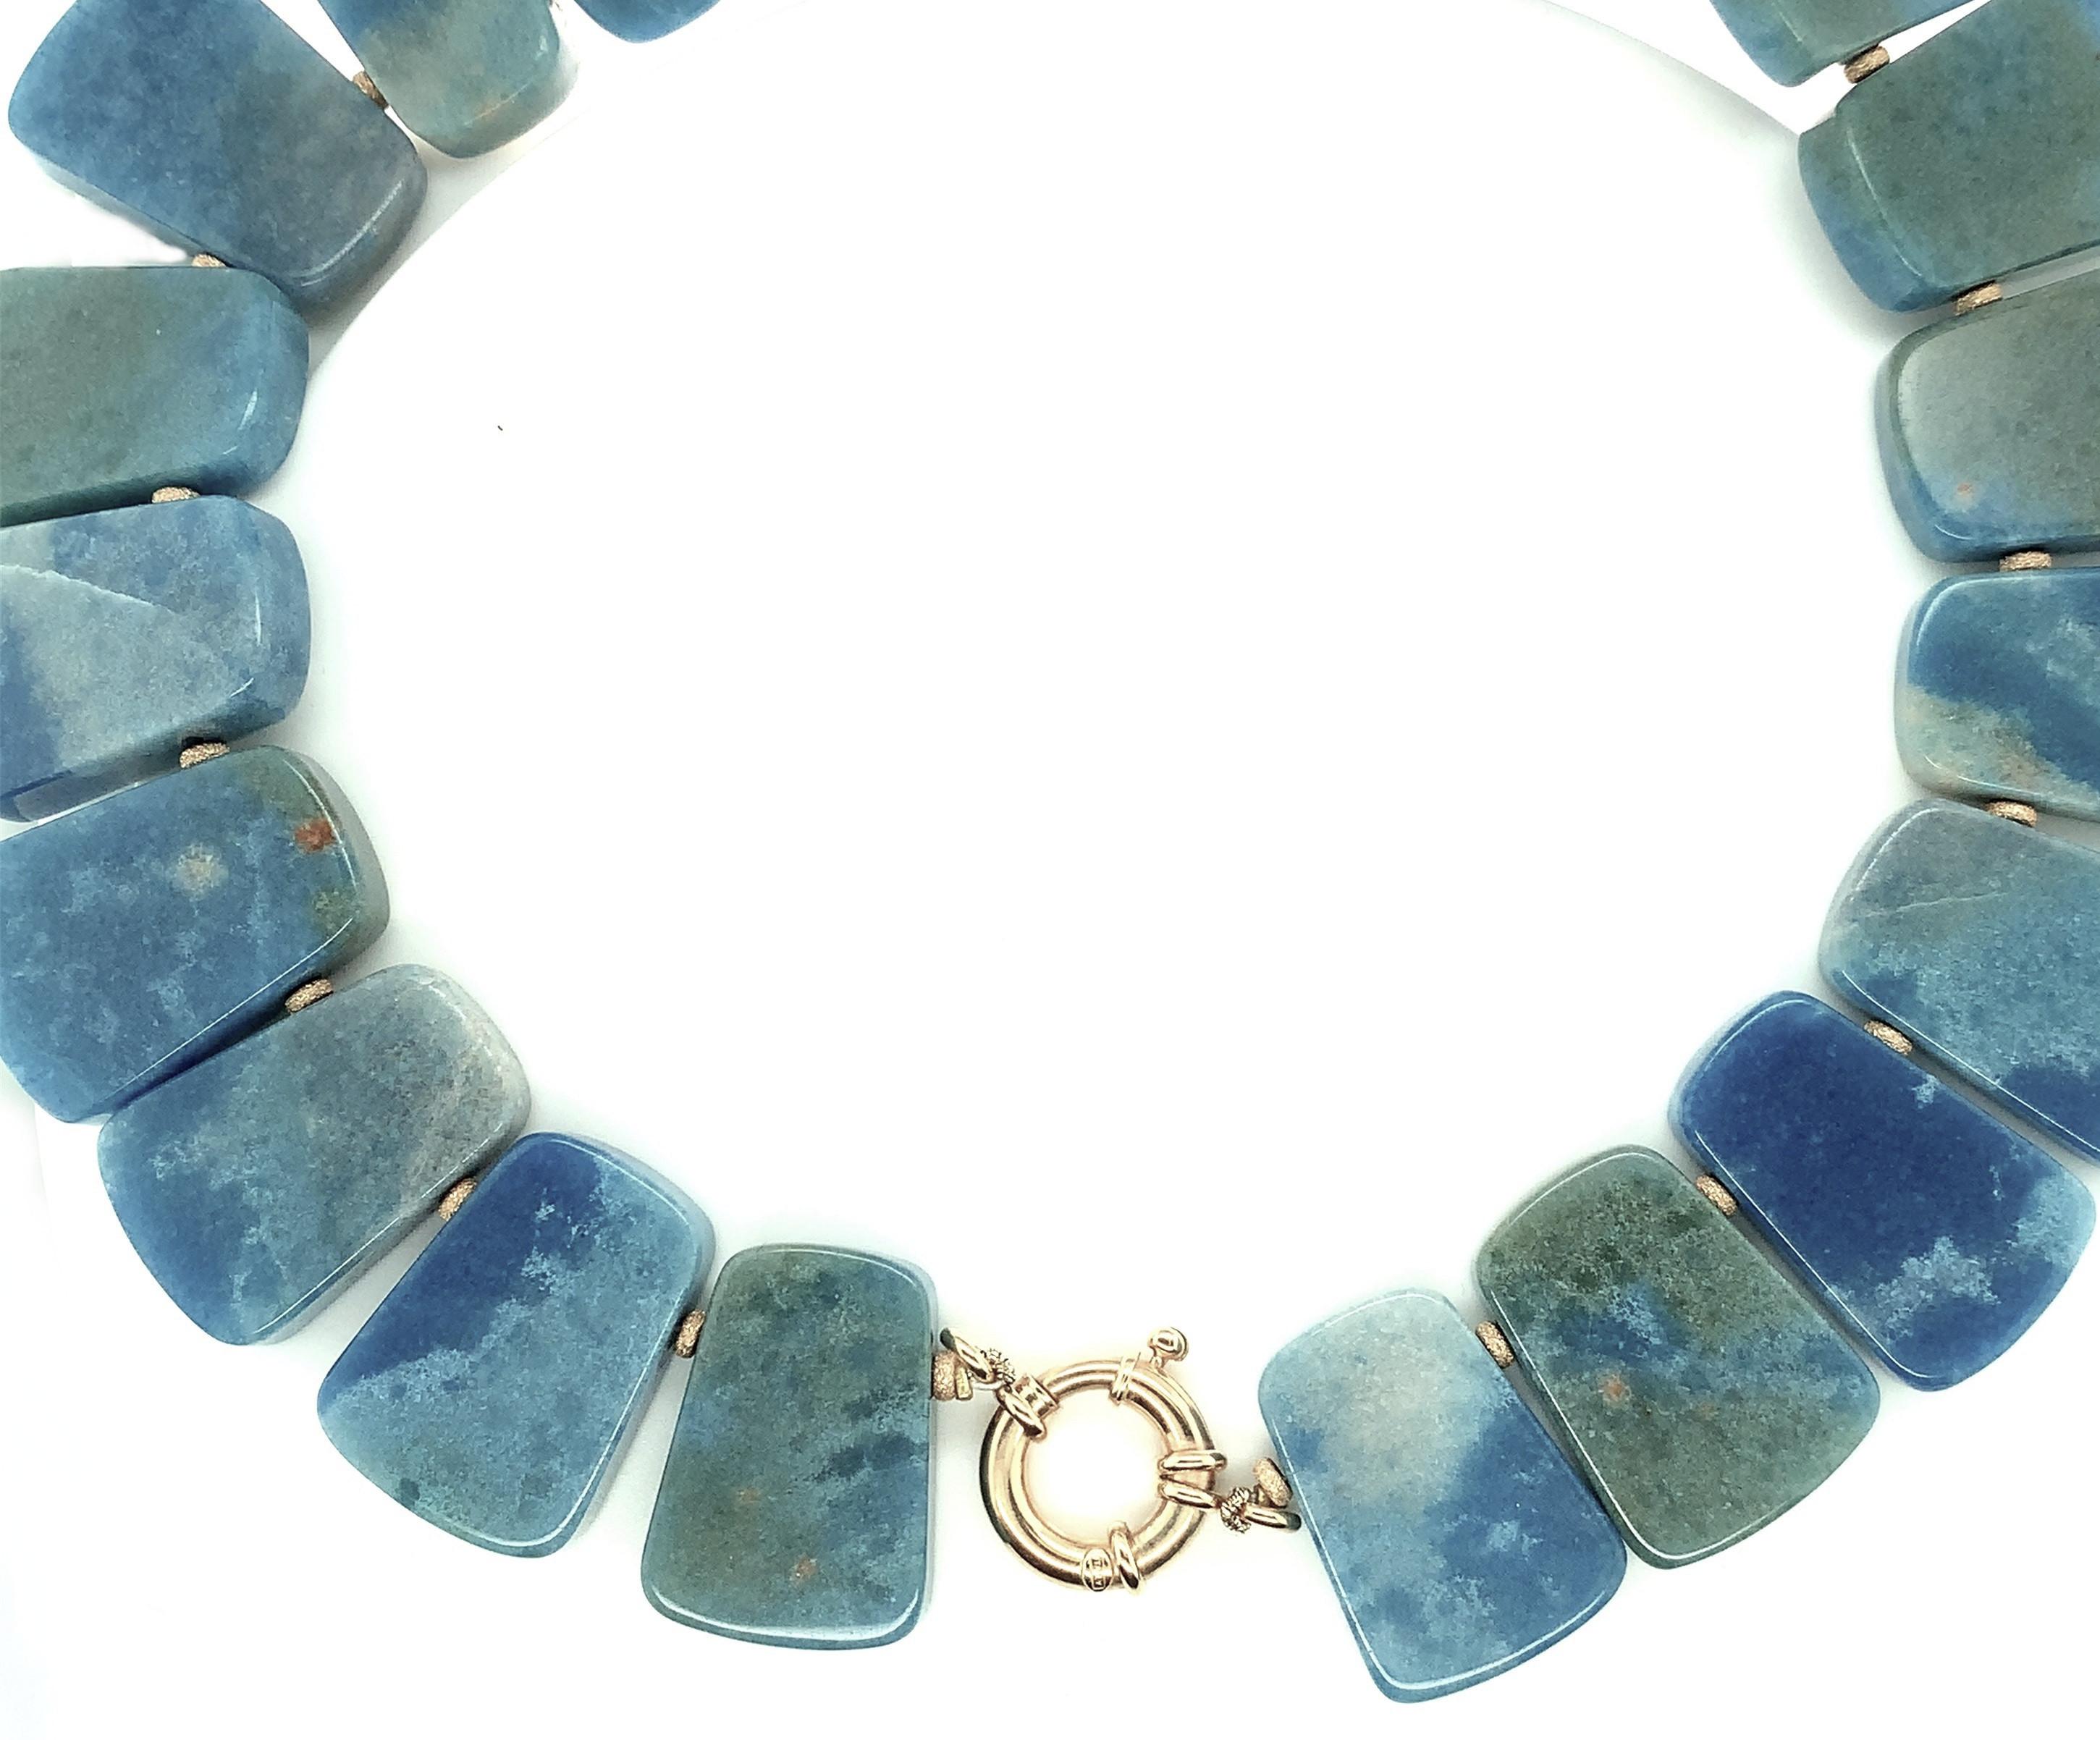 For a look that is cool, chic and stylish, this blue quartz necklace will fit the bill beautifully! Gorgeous, variegated blue quartz 